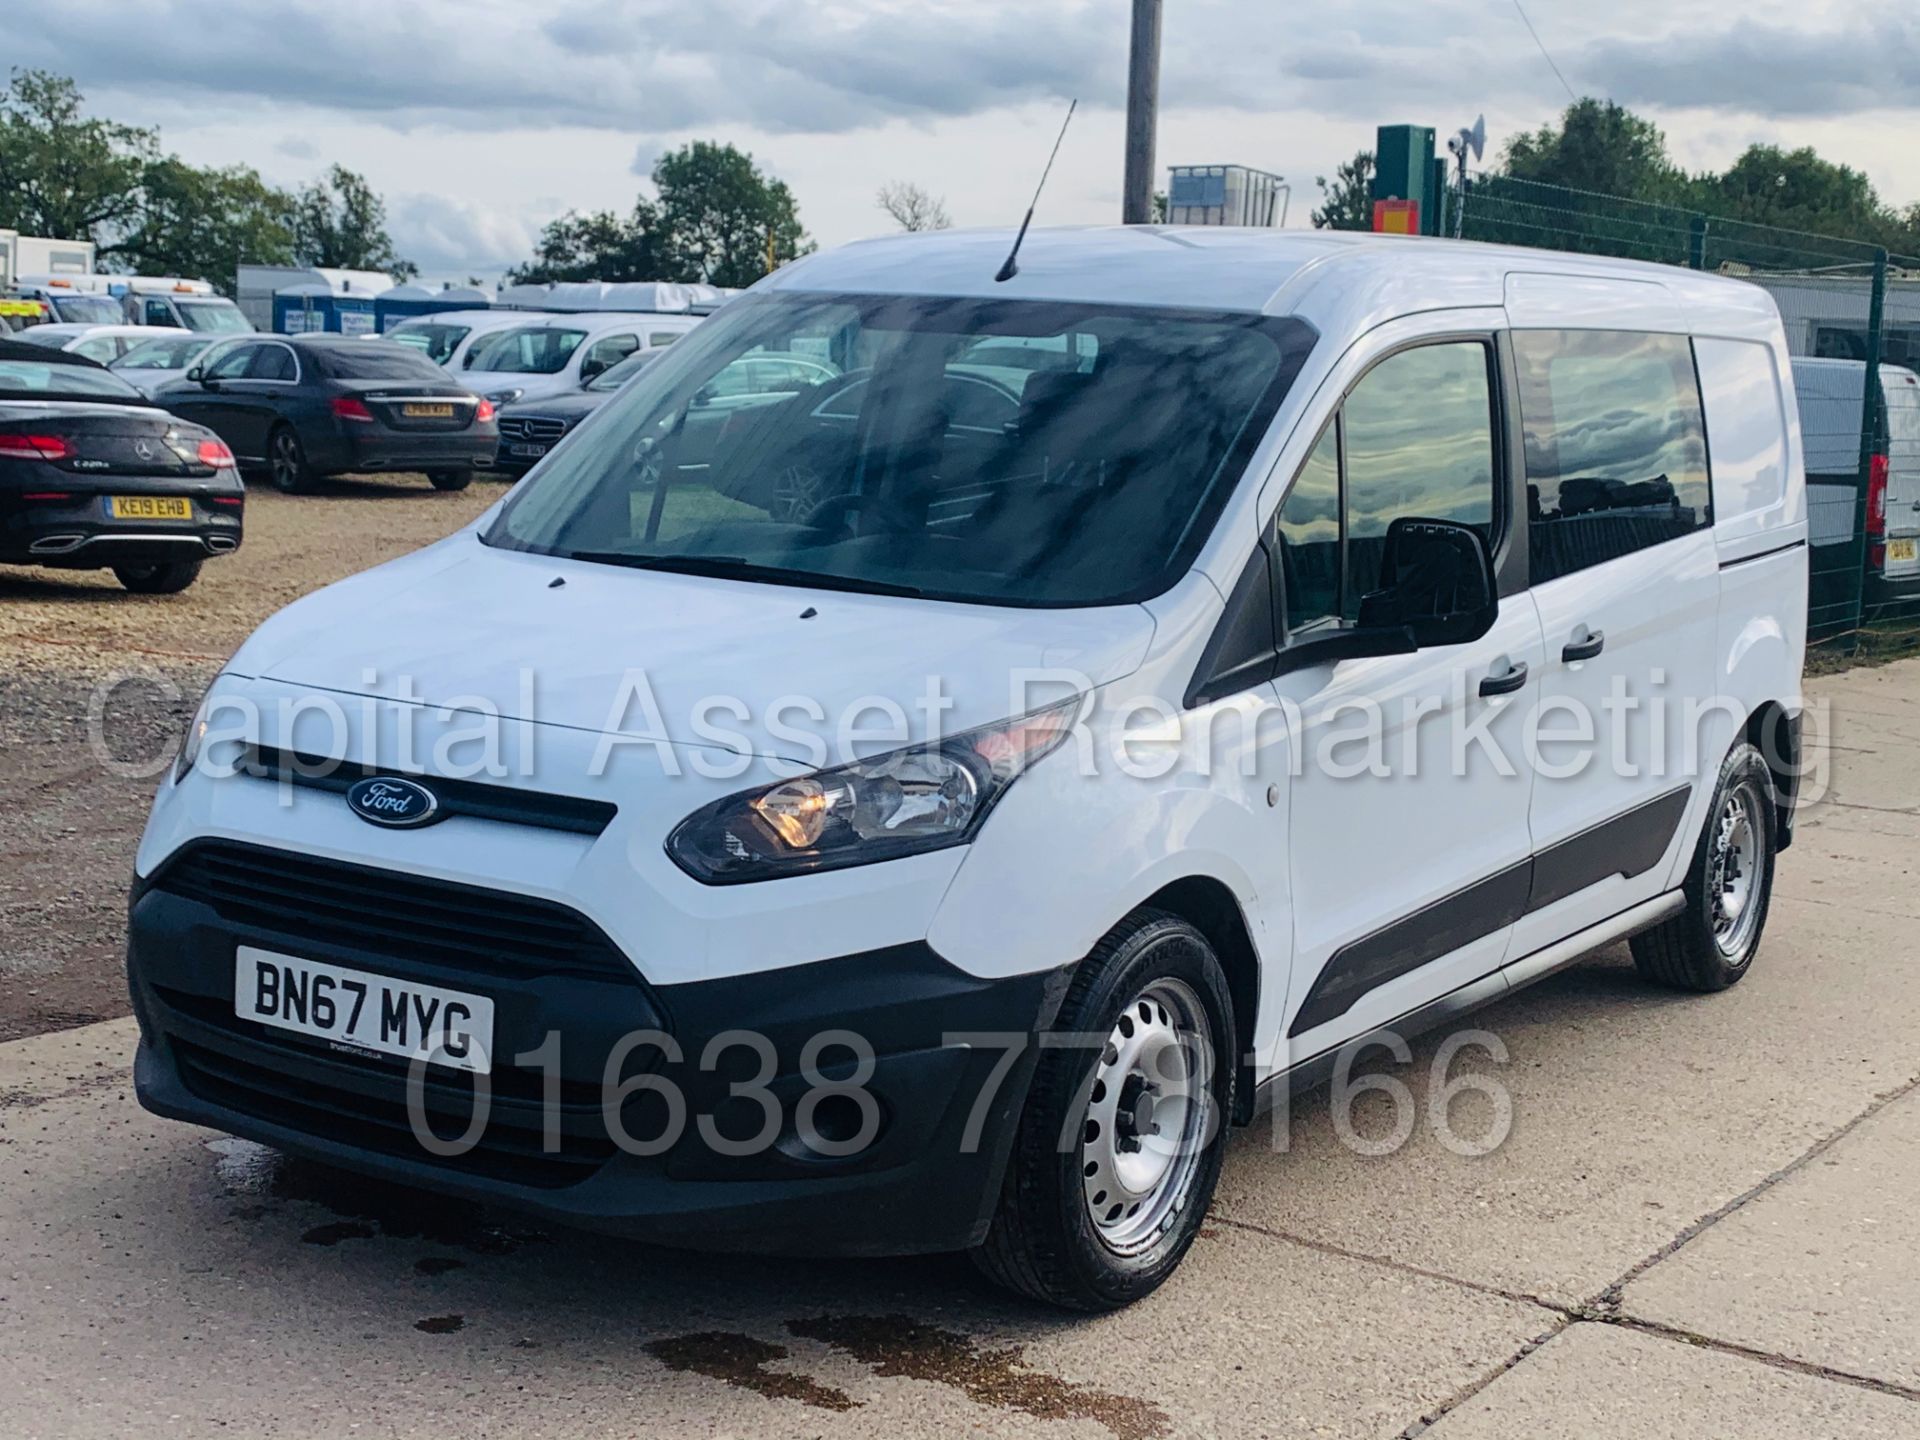 (On Sale) FORD TRANSIT CONNECT *LWB - 5 SEATER CREW VAN* (67 REG - EURO 6) 1.5 TDCI *A/C* (1 OWNER) - Image 4 of 40